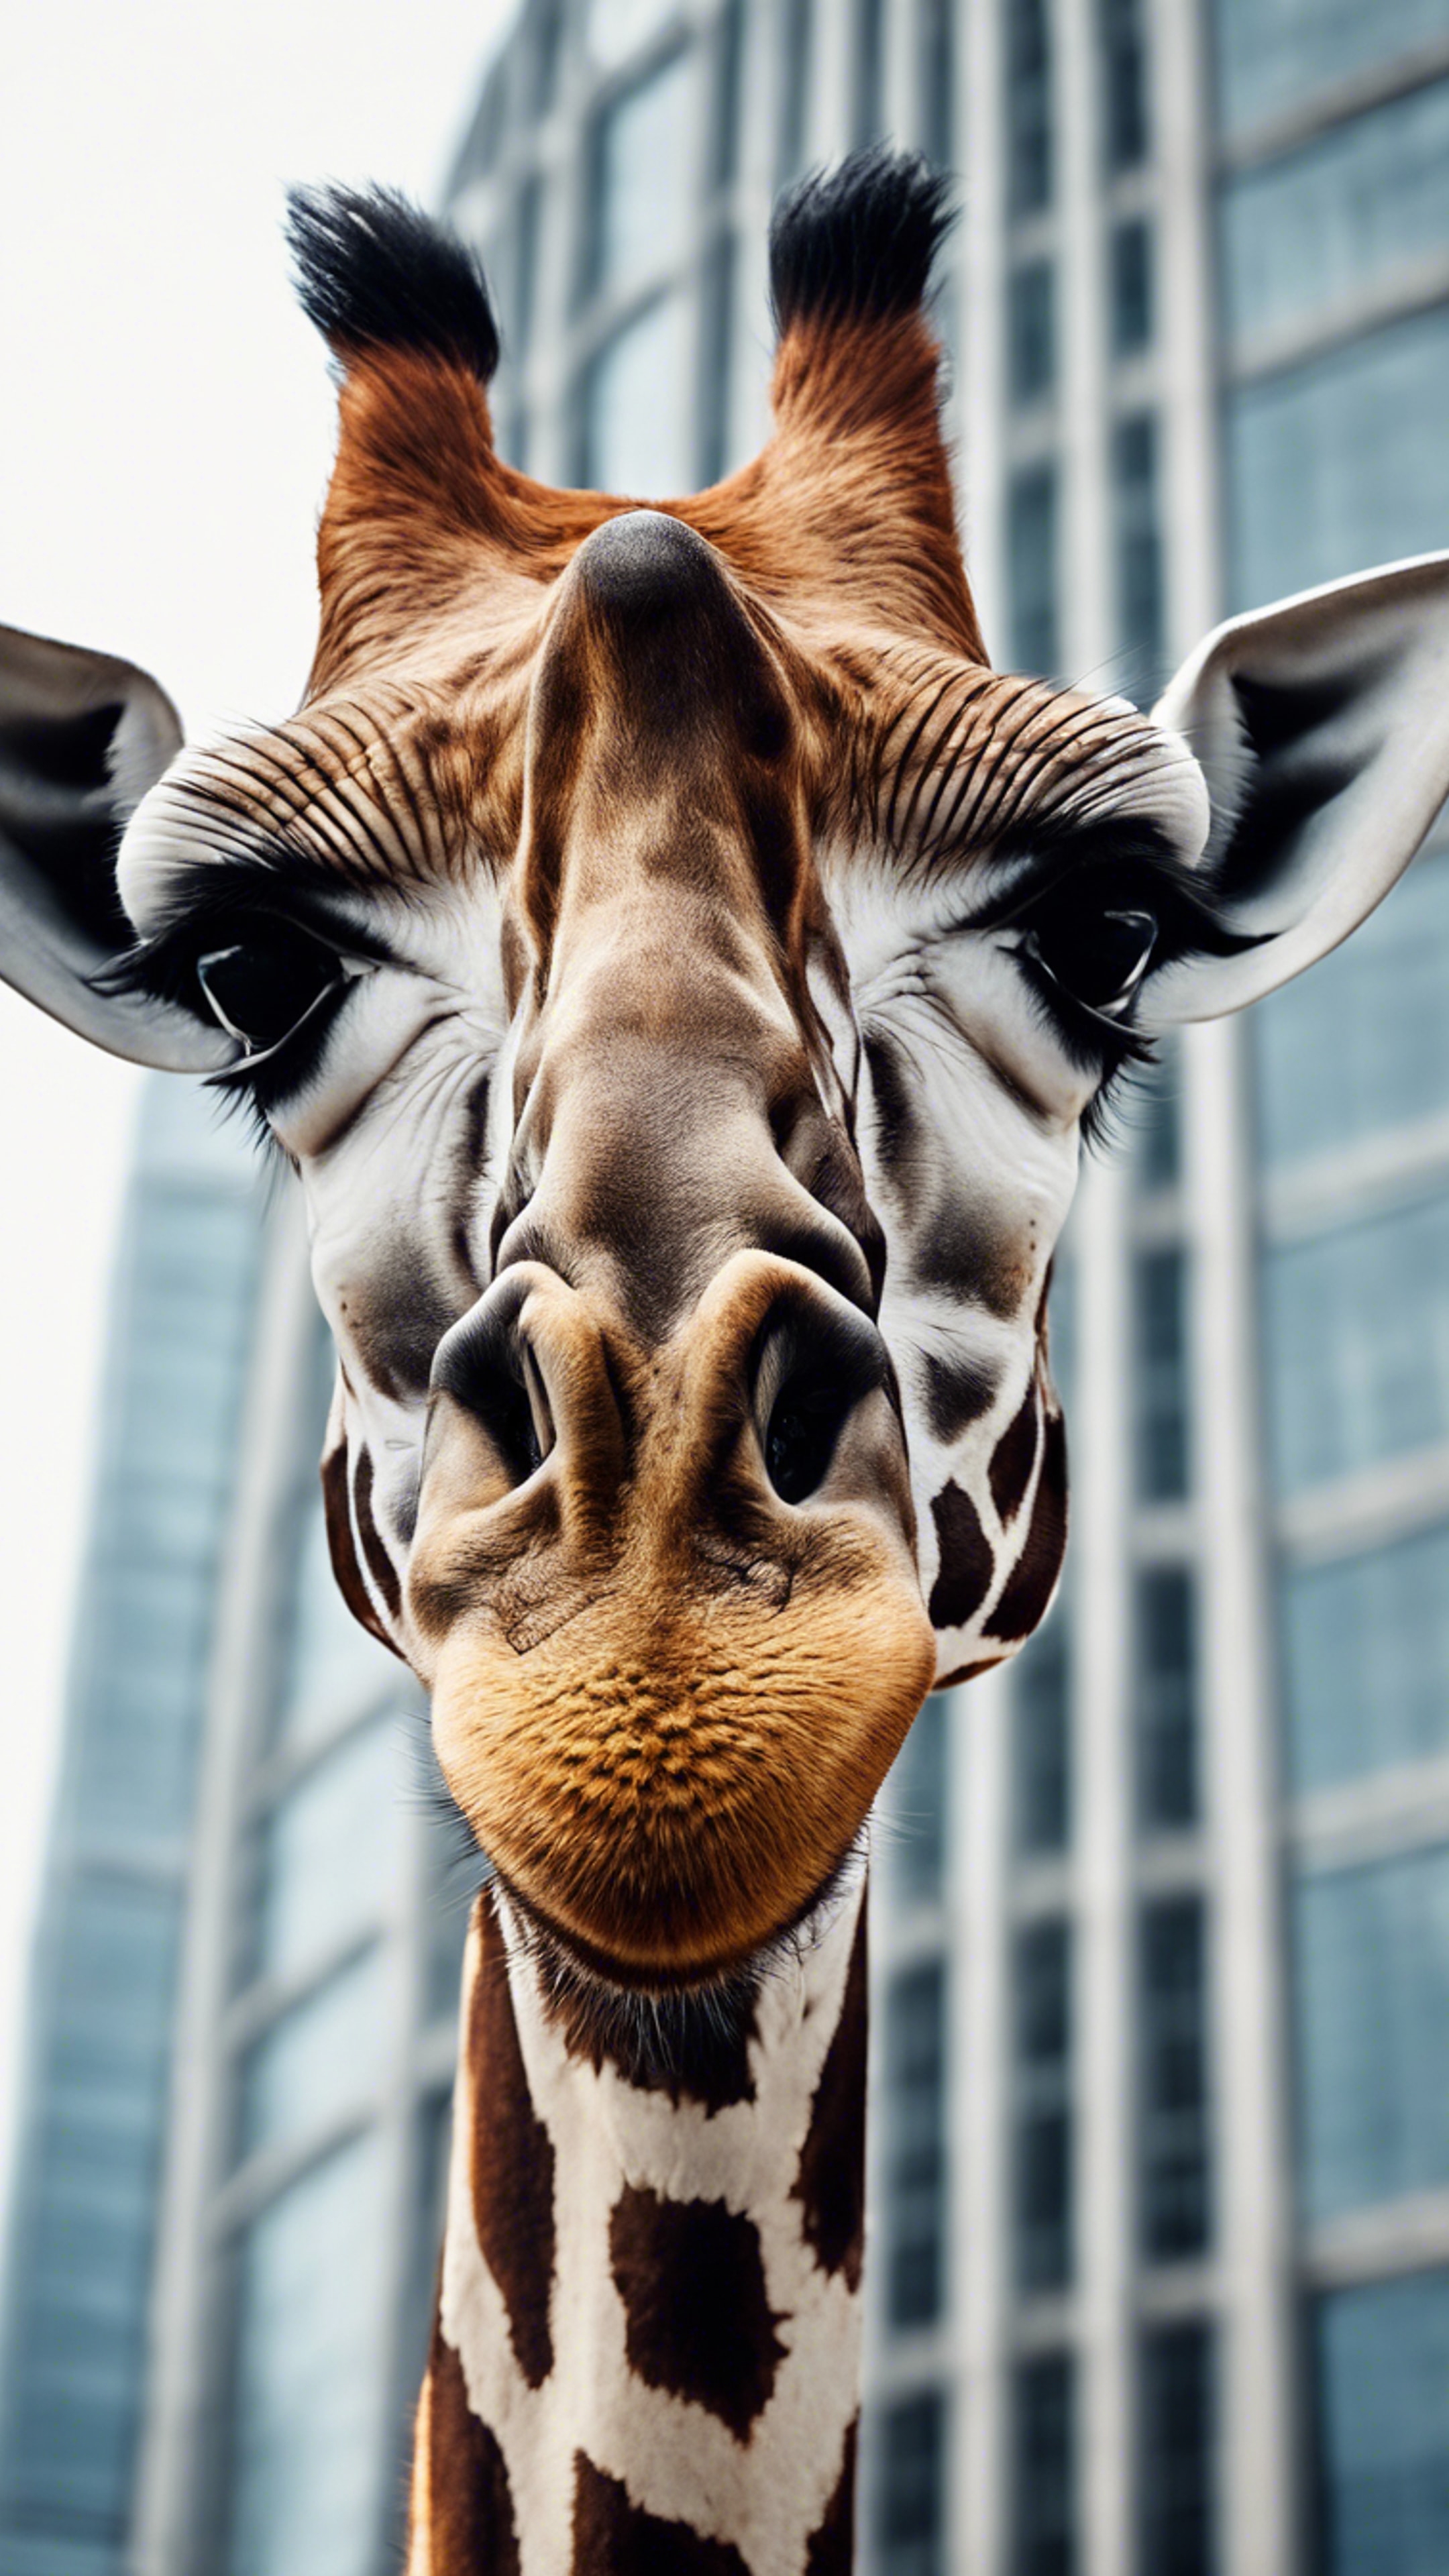 A giraffe in an urban setting, poking its head out from behind a skyscraper, symbolising wild nature confronting urbanisation. Tapet[4646bbcdc786429d9f19]